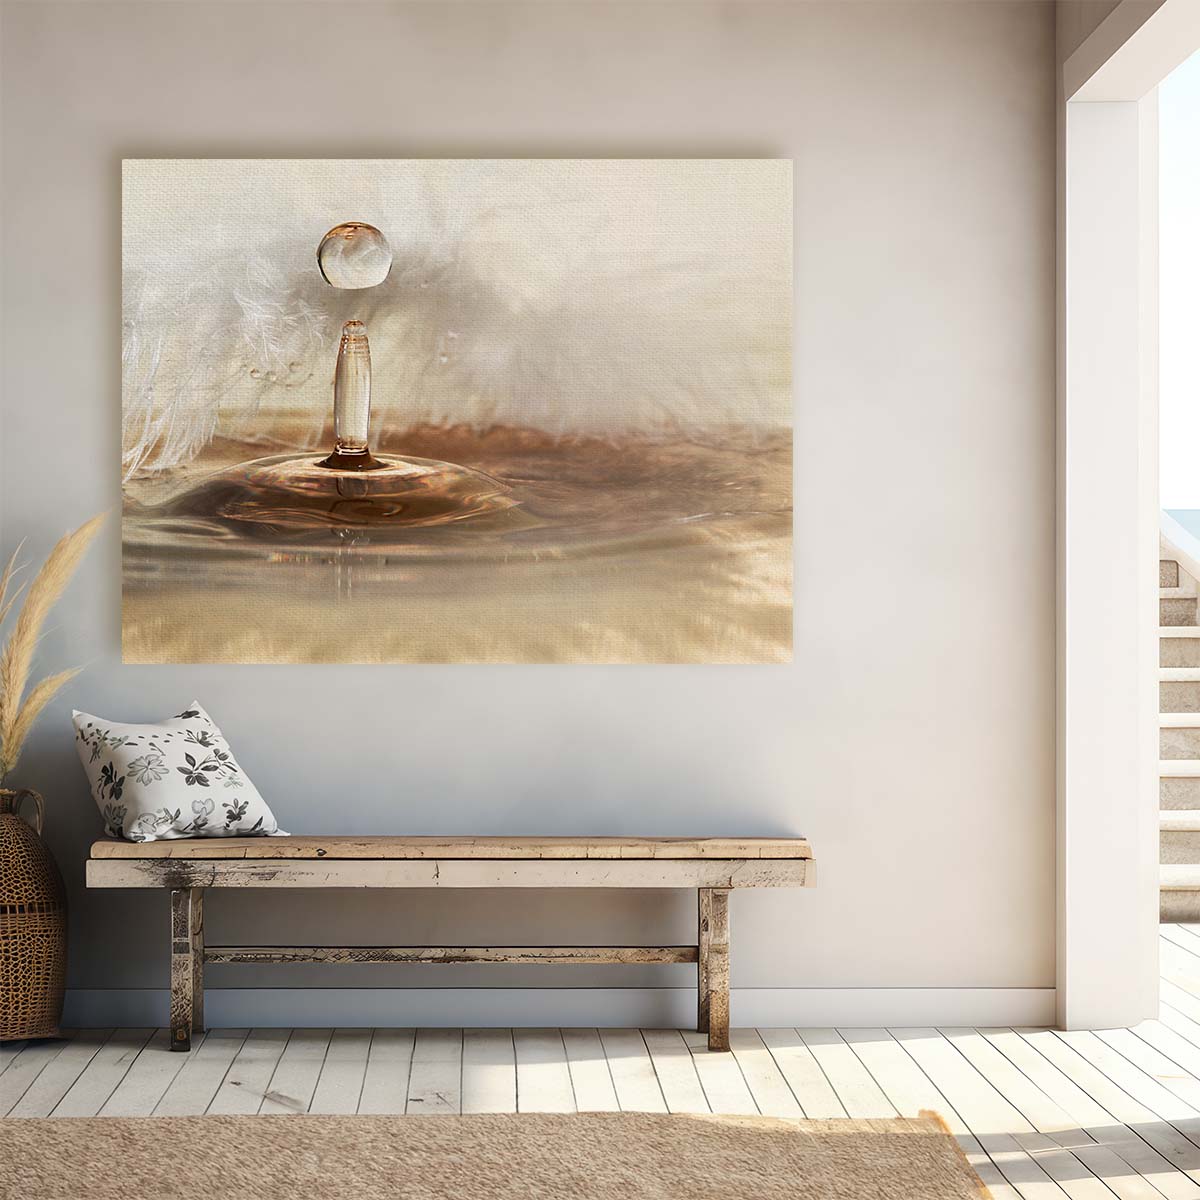 Golden Feather & Water Droplet Abstract Wall Art by Luxuriance Designs. Made in USA.